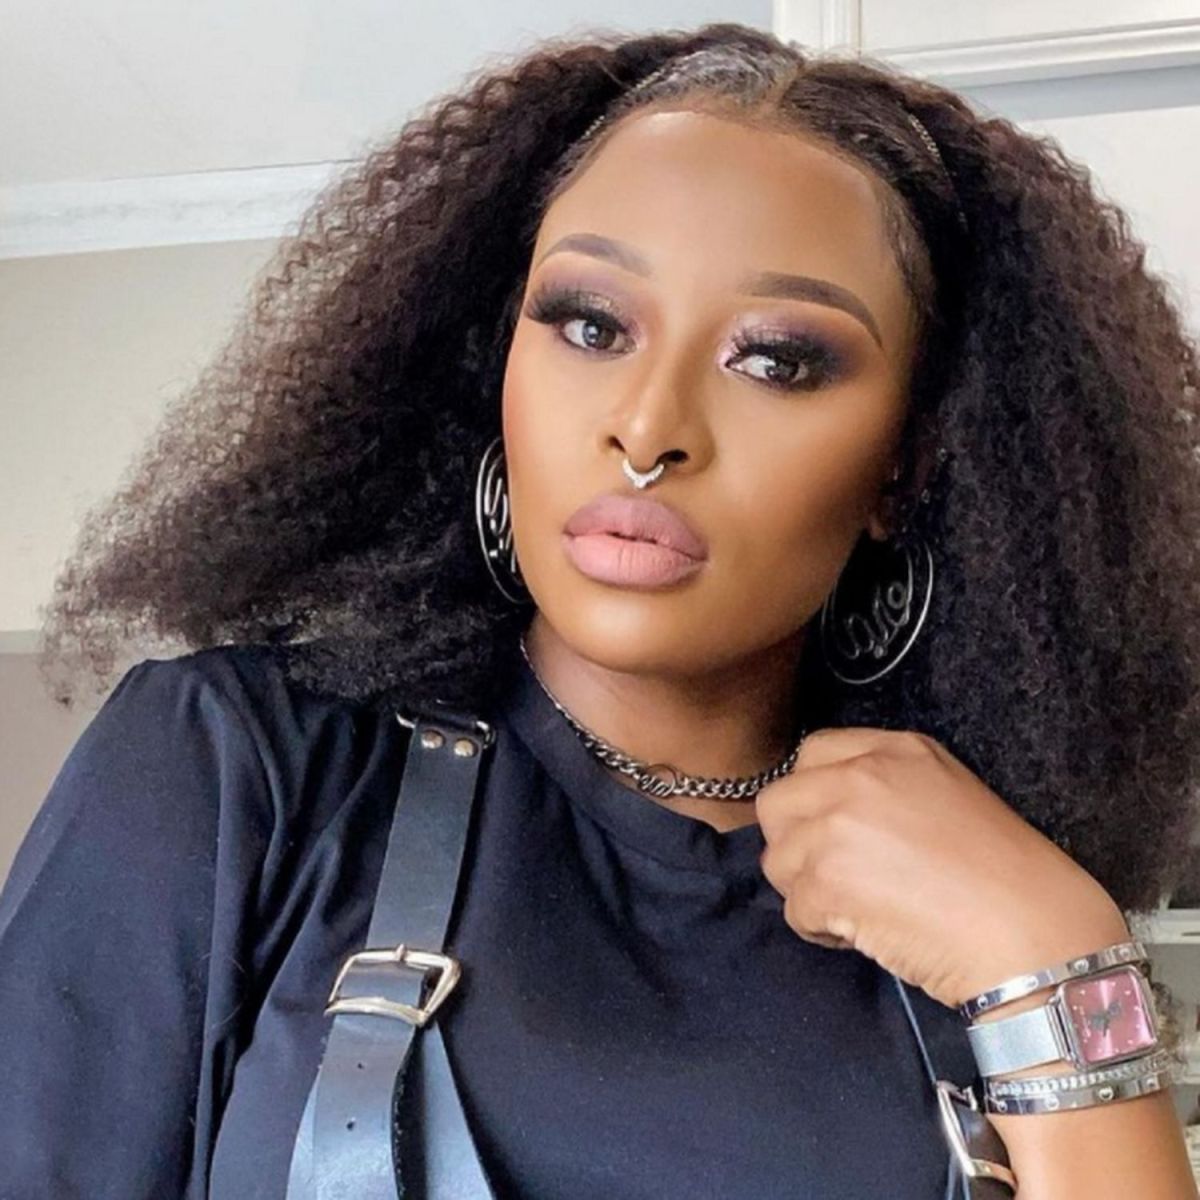 Dj Zinhle Reacts To Backlash Over Not Knowing How To Cook 6